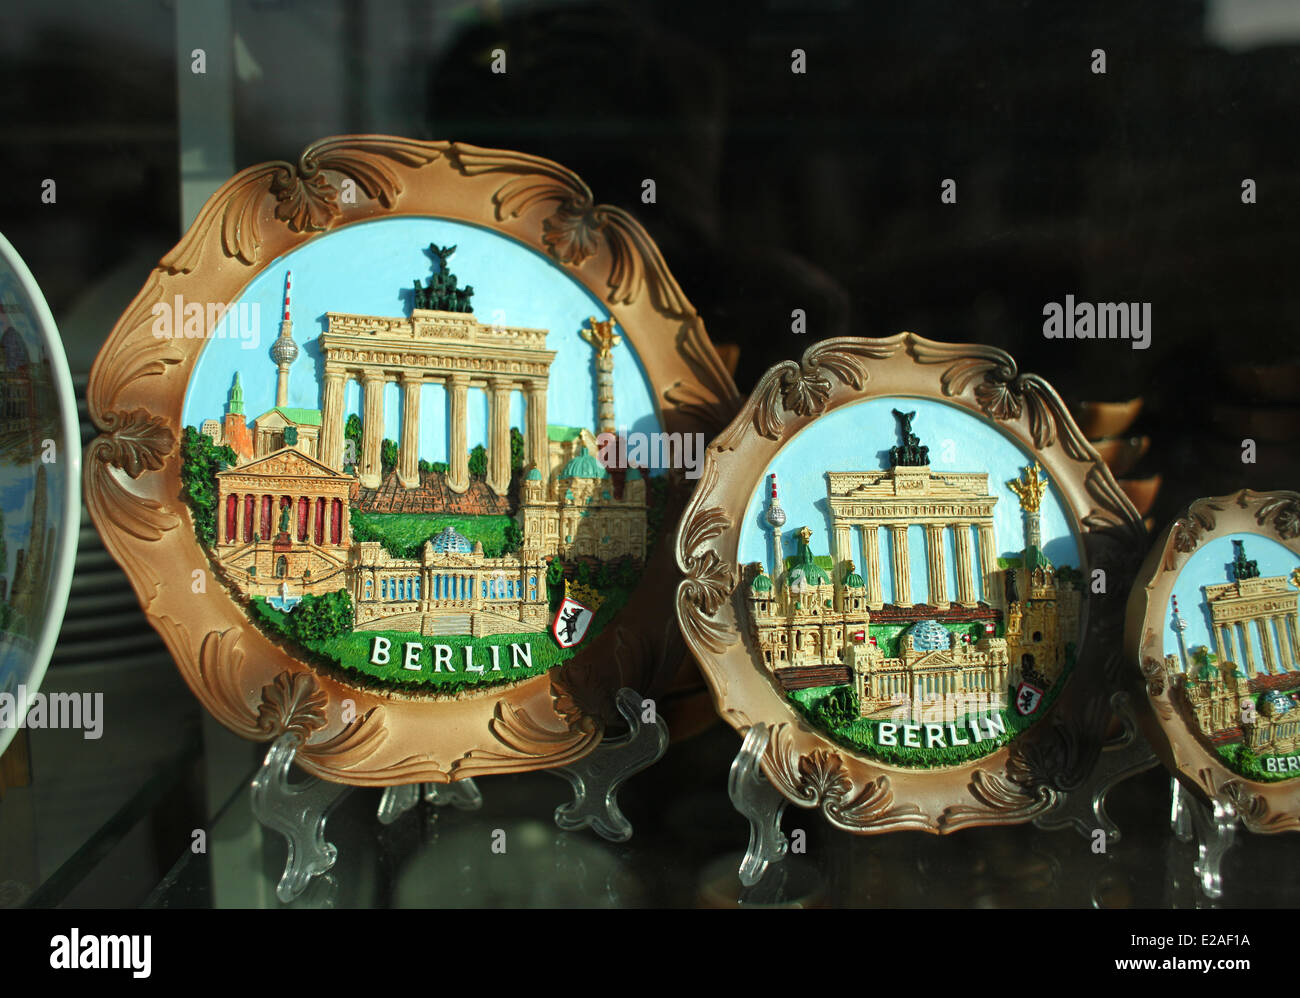 Plates with Berlin landmarks are seen in a gift shop for tourists in Berlin at Alexanderplatz , January  02, 2014. The photo is part of a series on tourism in Berlin. Photo: Wolfram Steinberg dpa Stock Photo